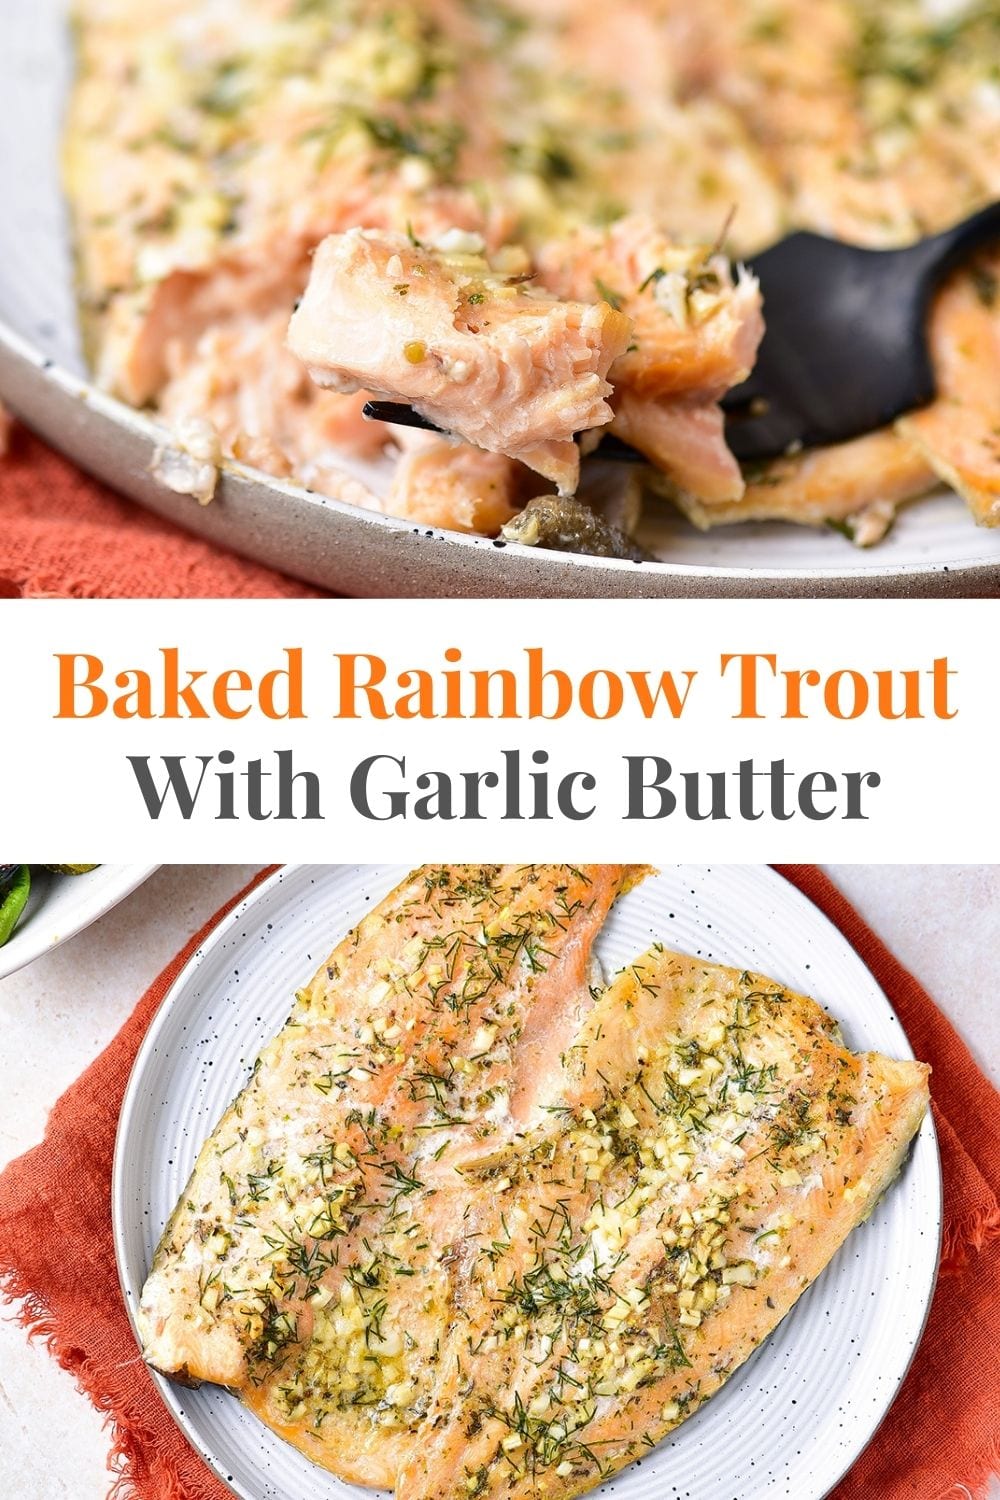 Baked Rainbow Trout With Garlic Butter